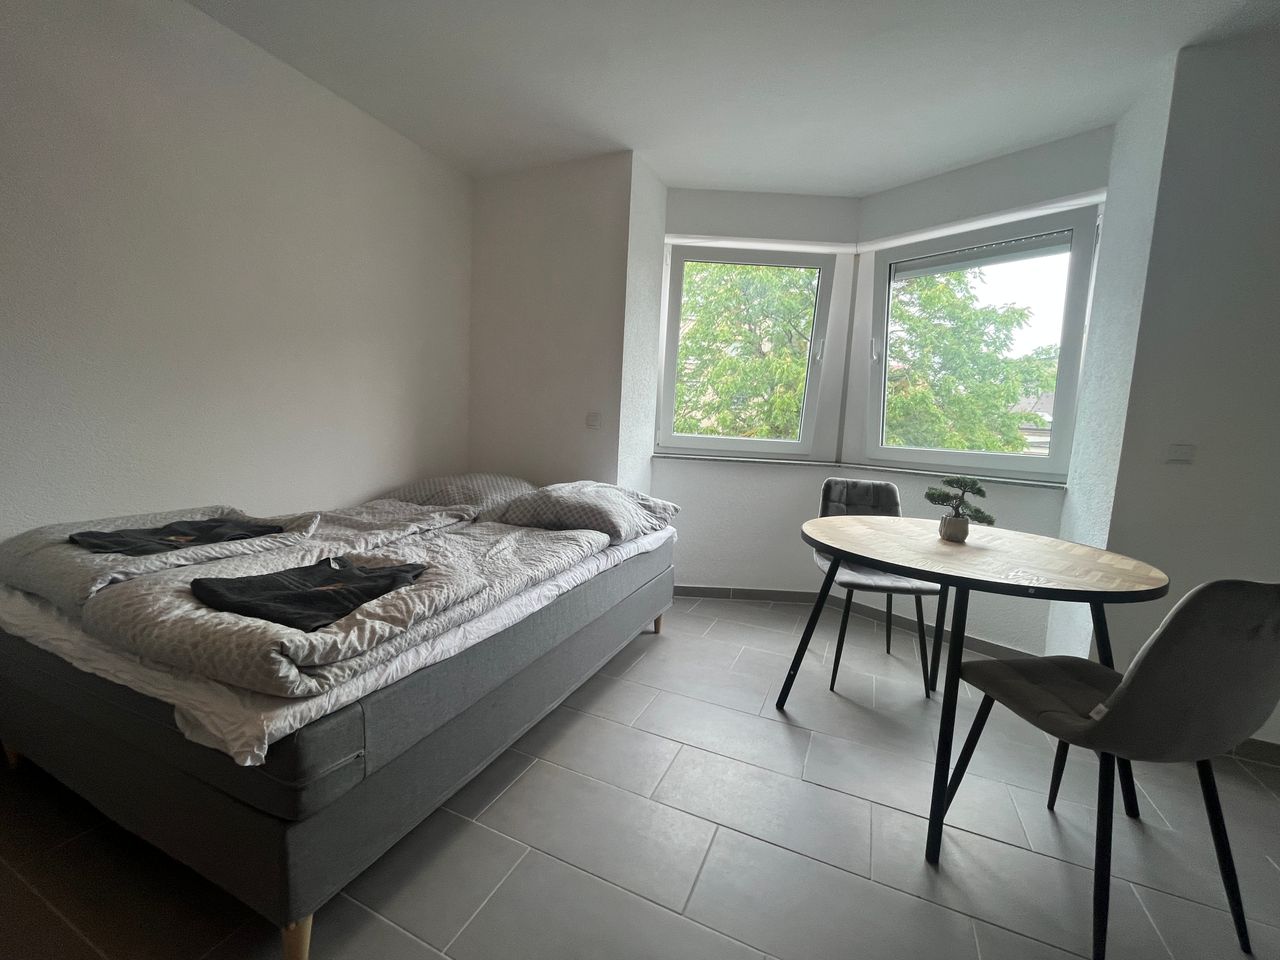 Simplex Apartments: cetral located apartment, Karlsruhe near "Postgalerie"